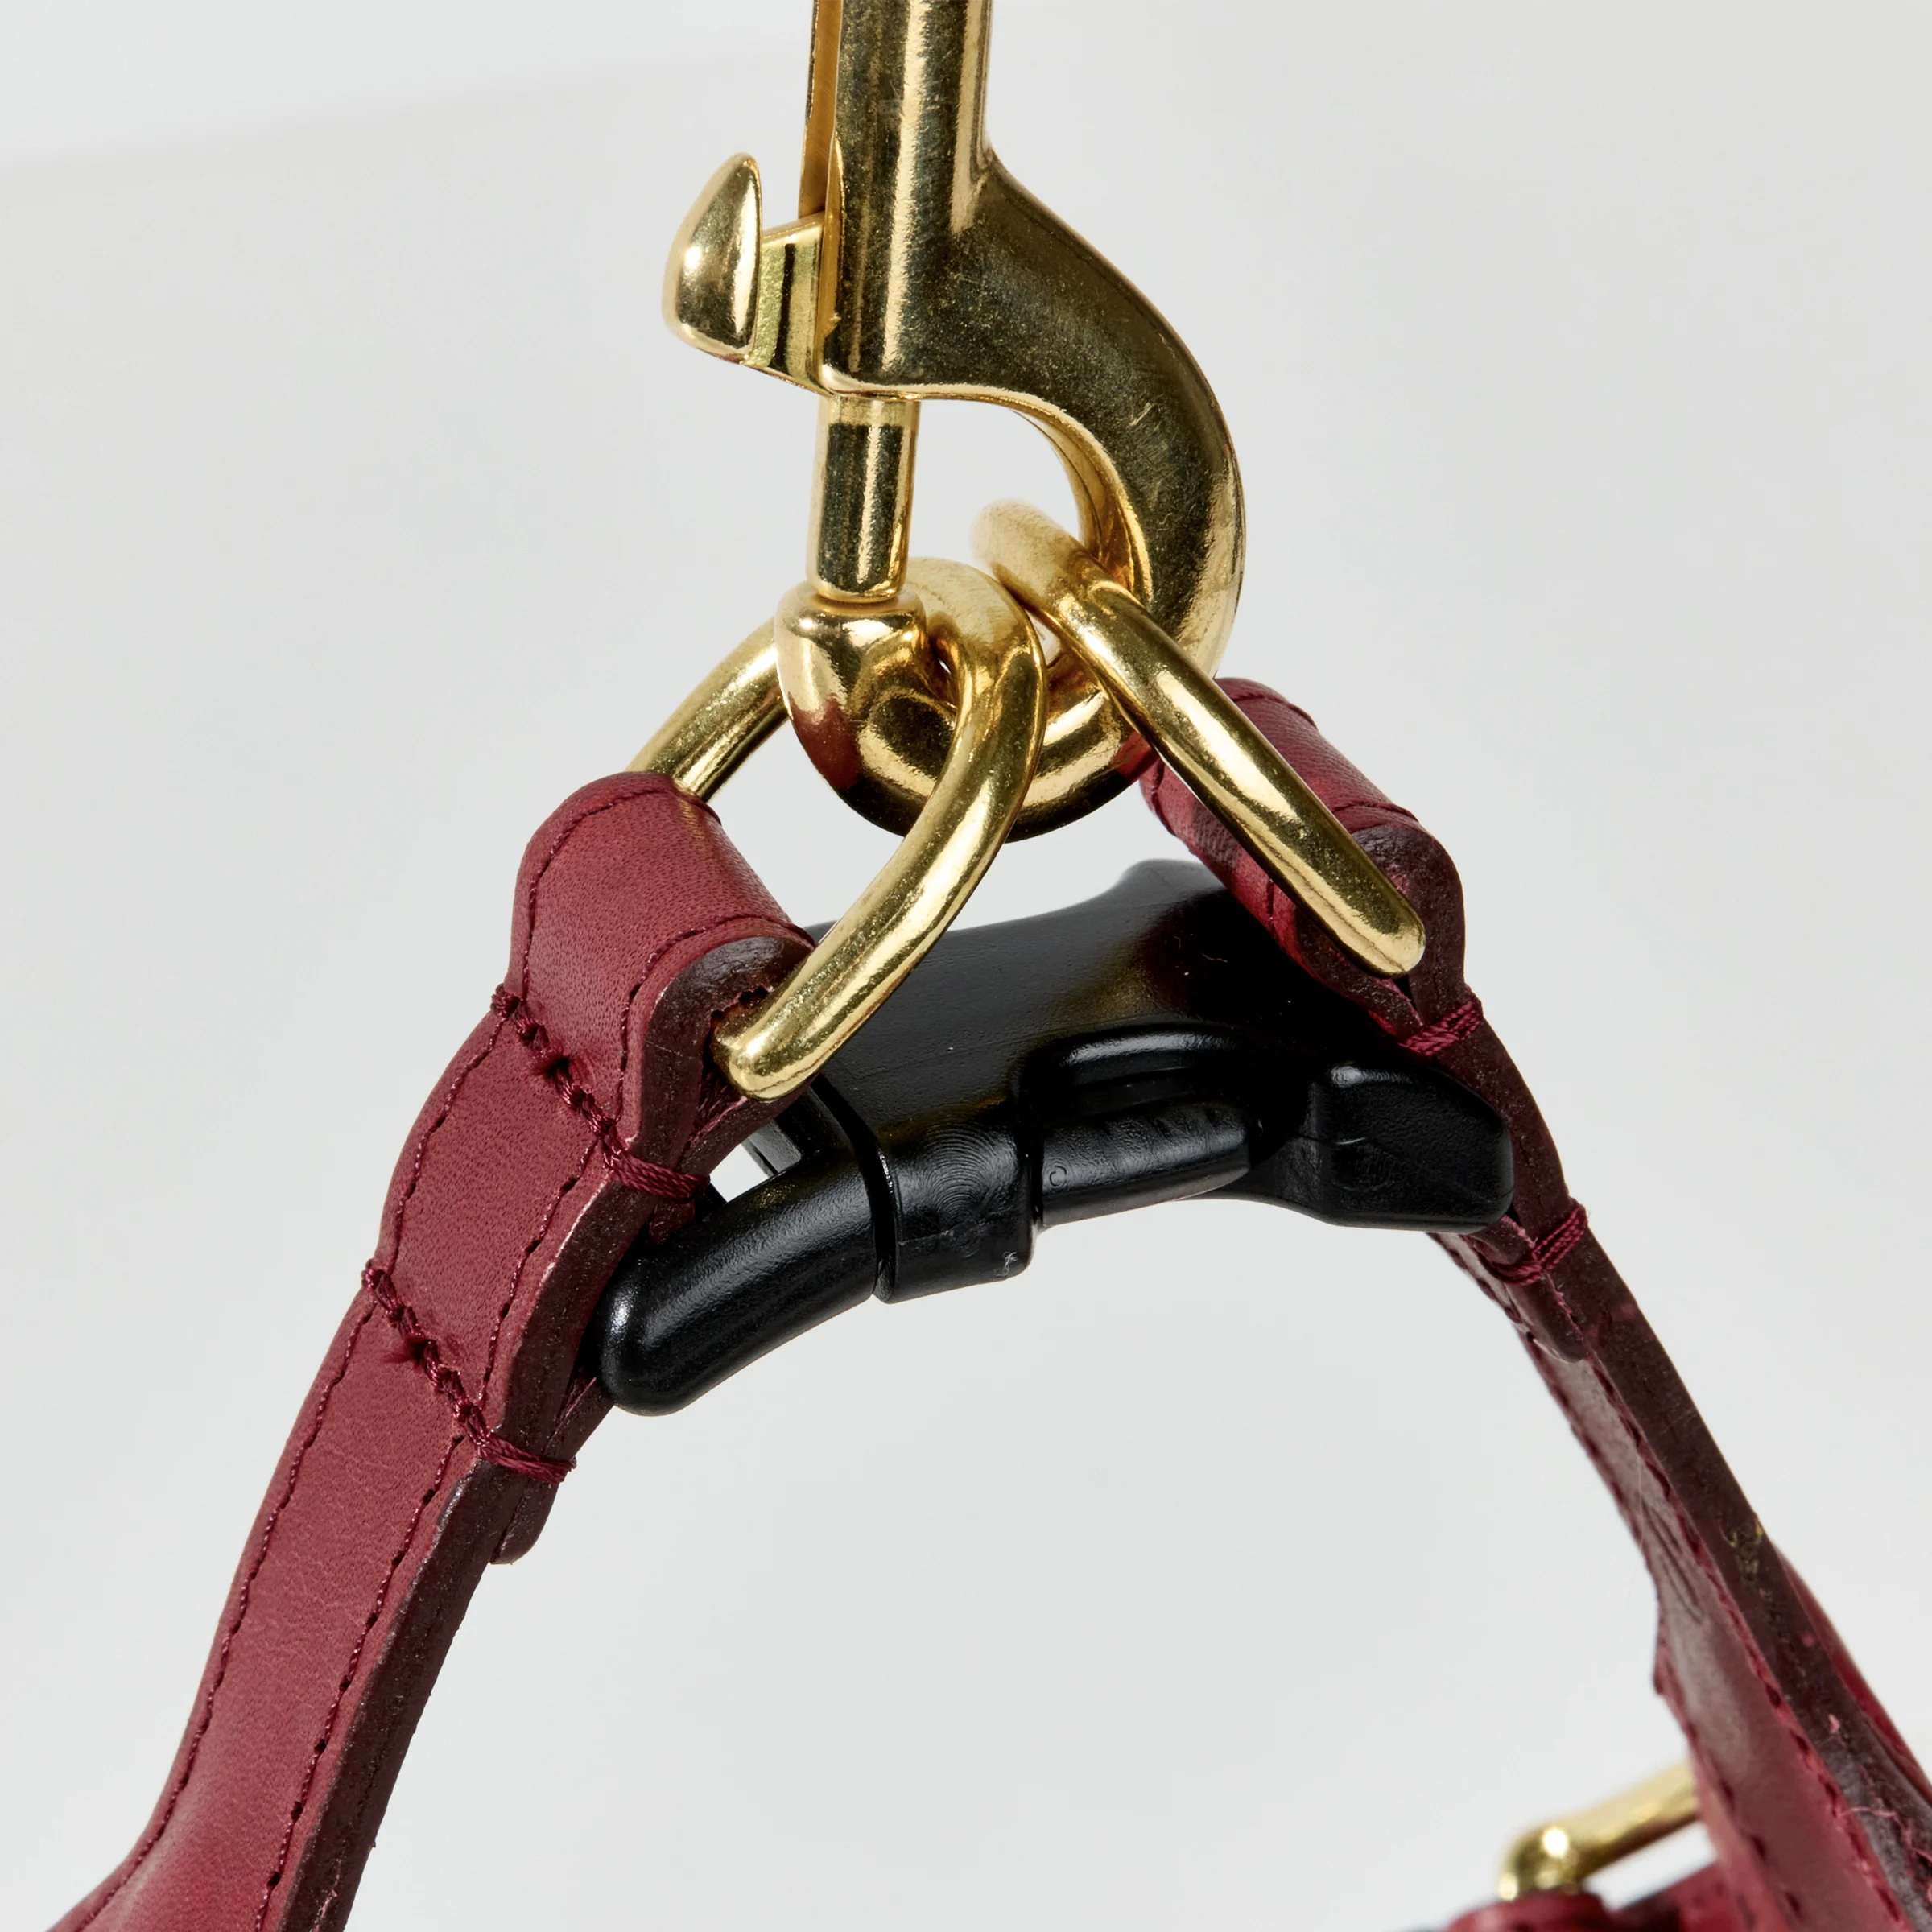 One-click Leather Dog Harness (Red)